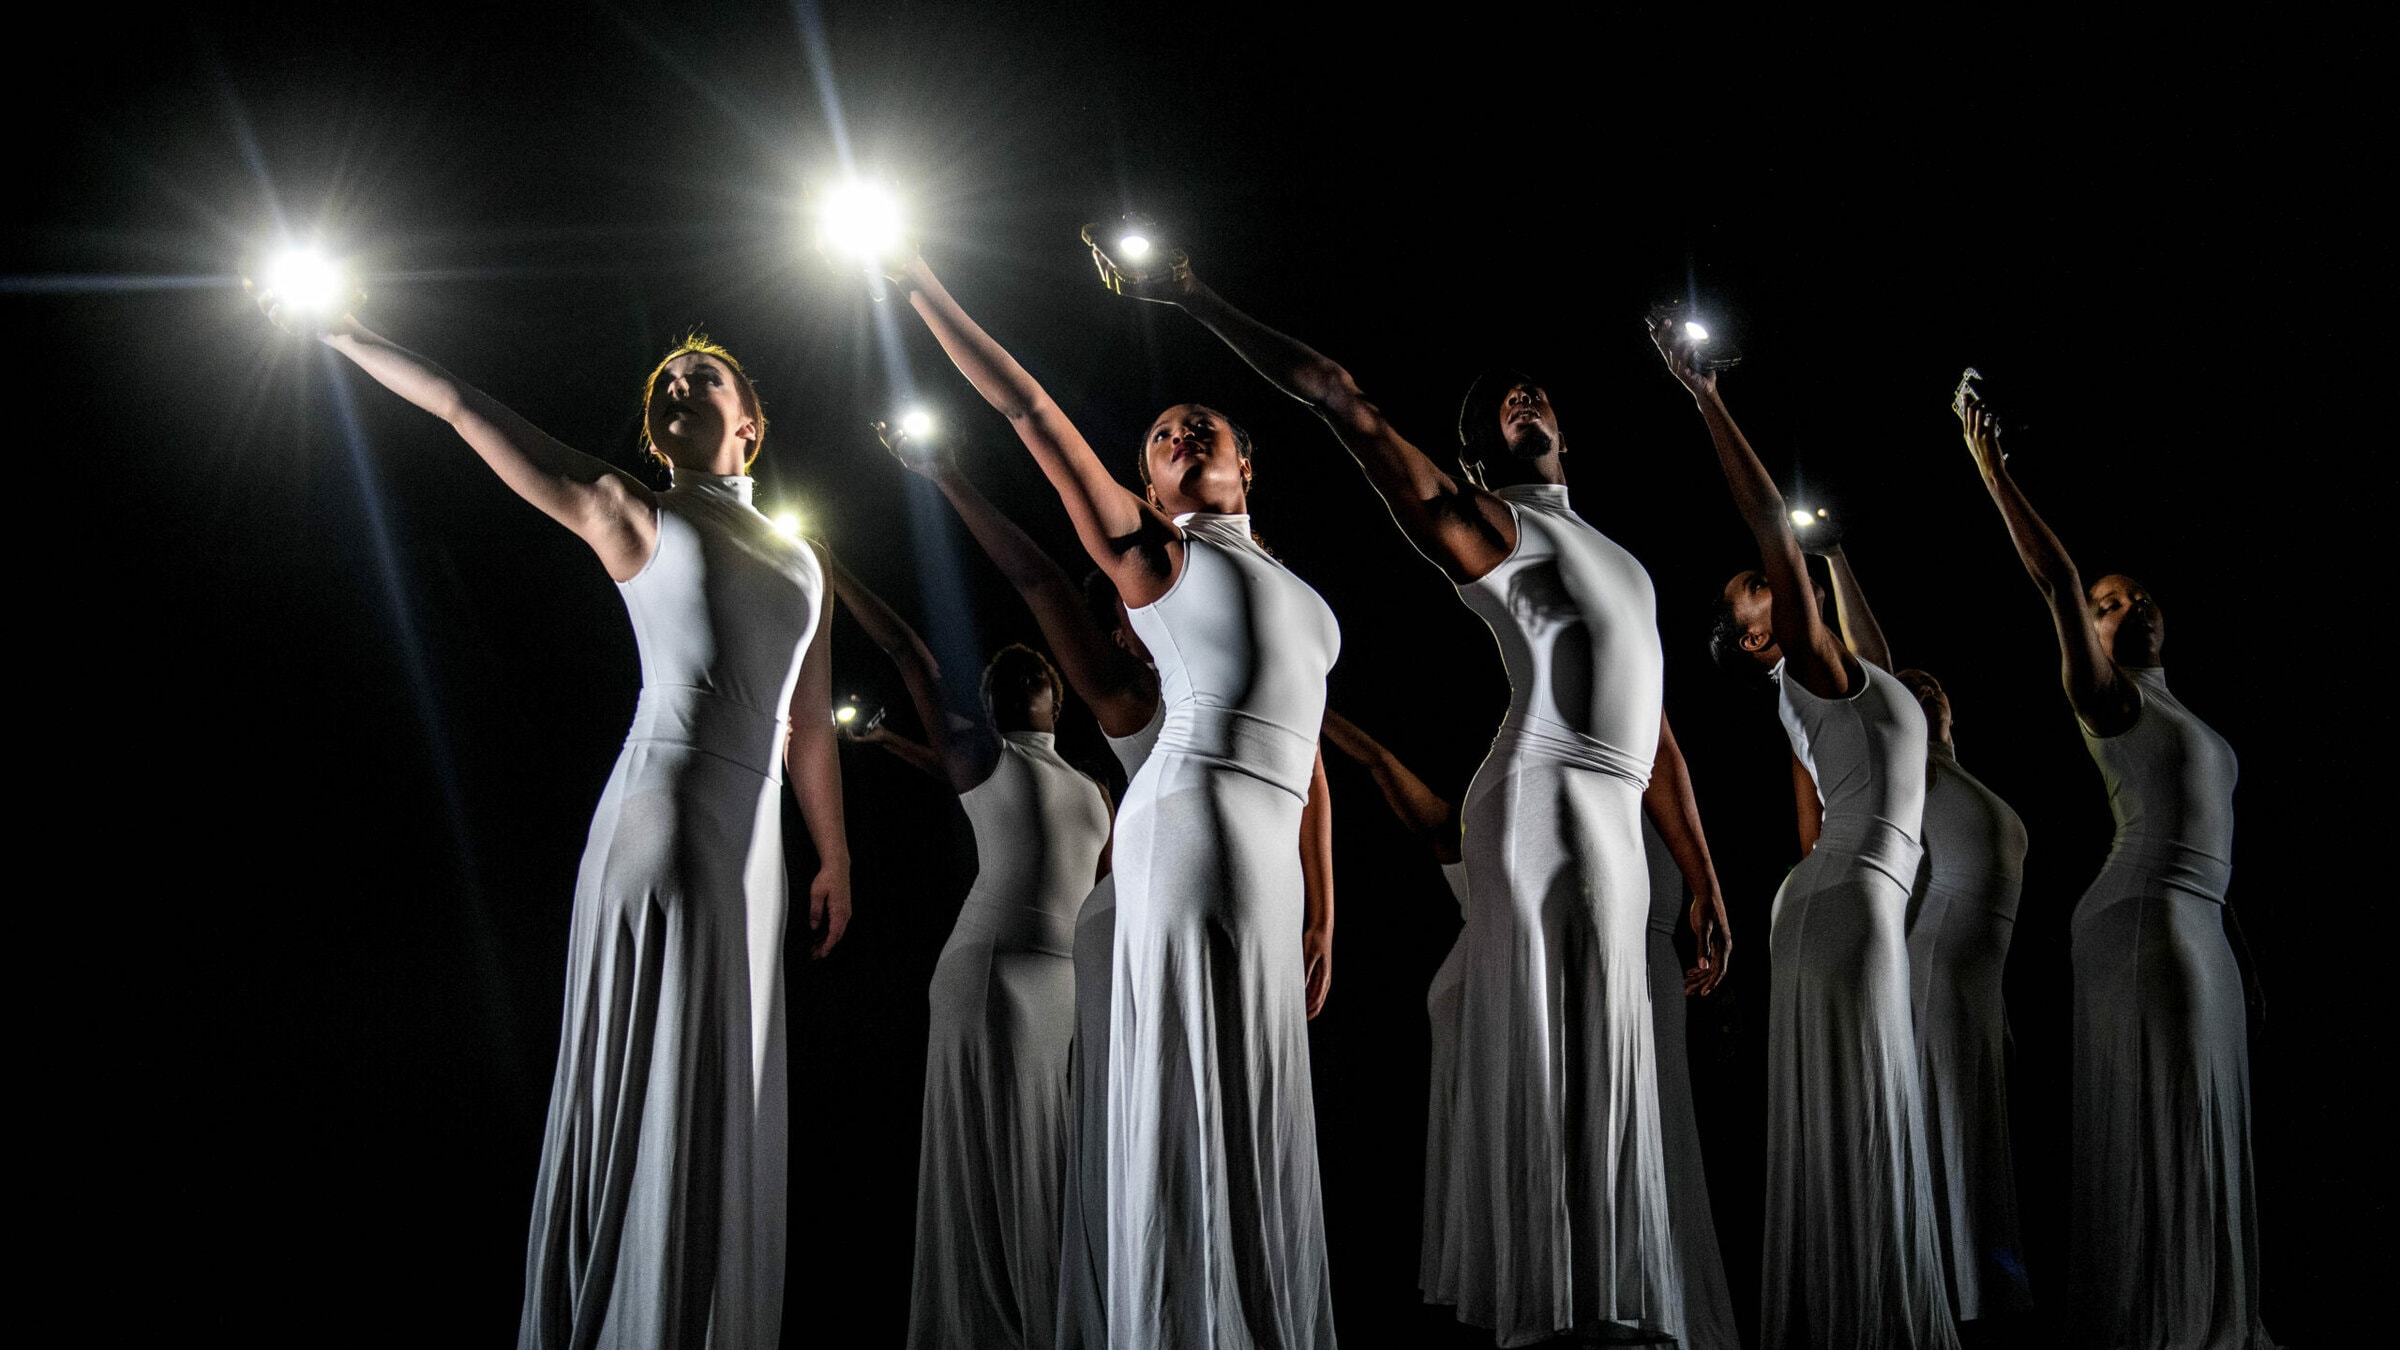 A group of dancers hold lights in the air while performing on stage